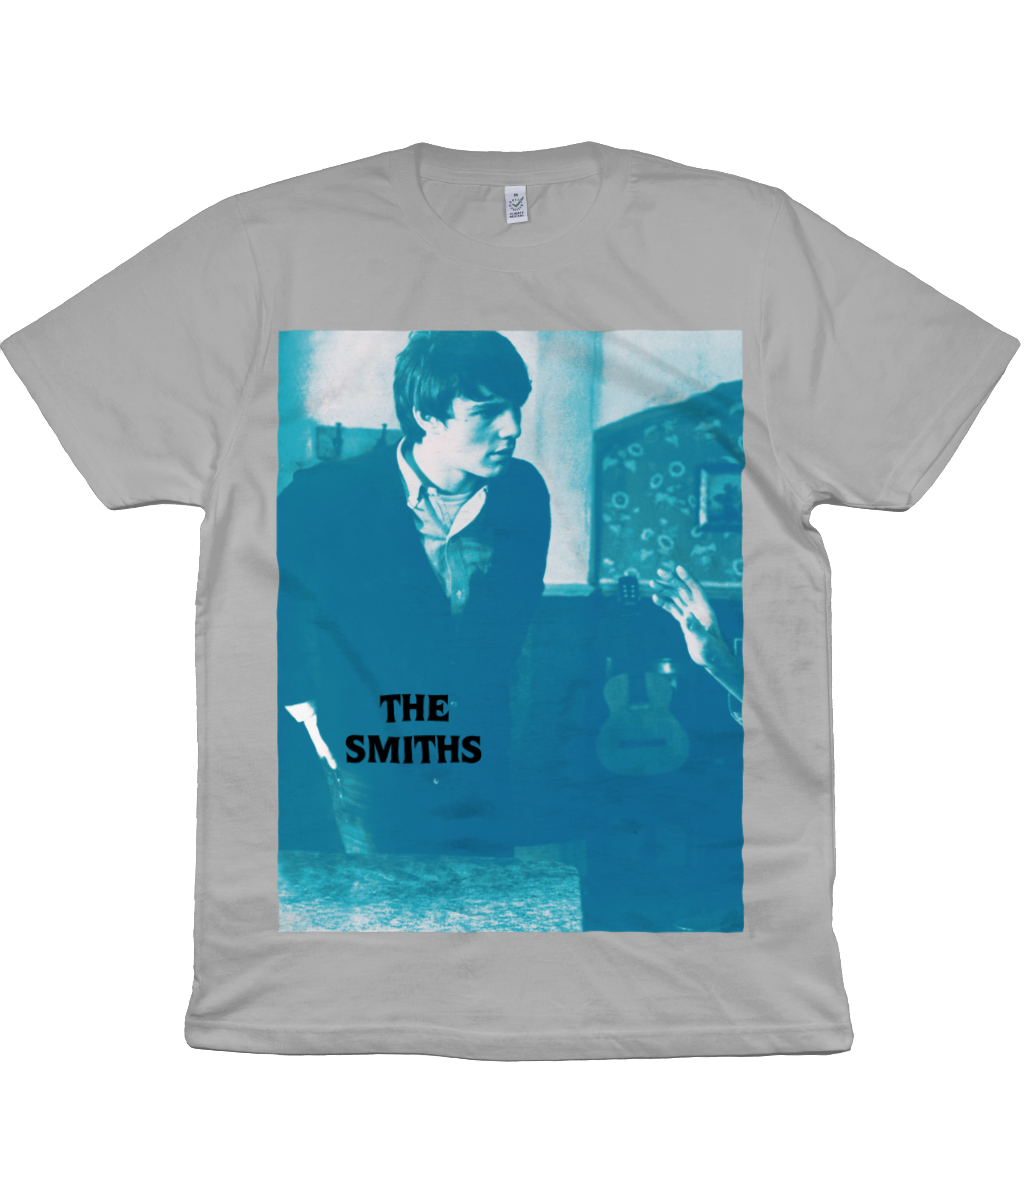 THE SMITHS - STOP ME IF YOU THINK YOU'VE HEARD THIS ONE BEFORE - US - 1987